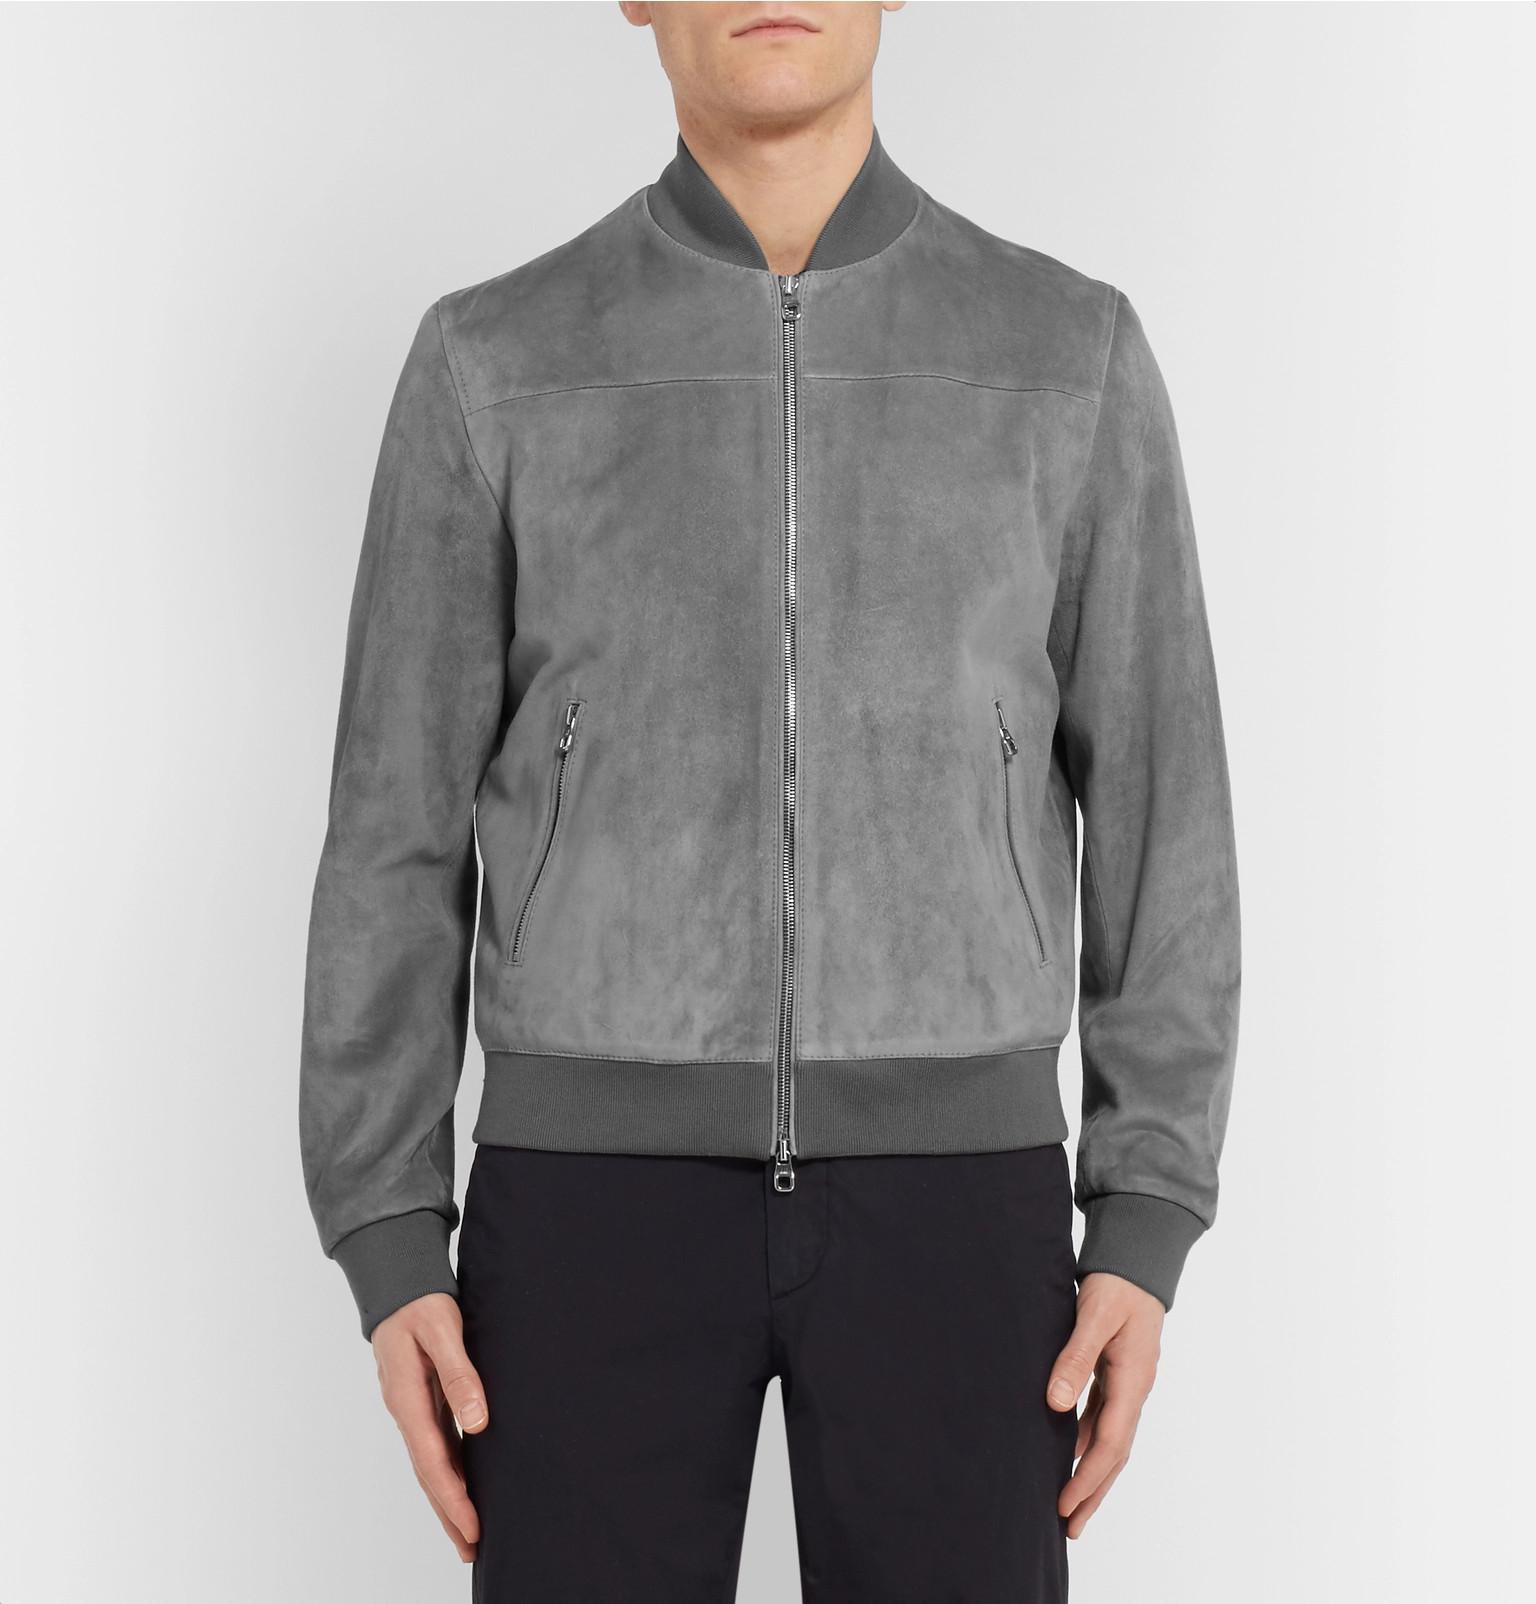 Dunhill Suede Bomber Jacket in Grey for Men - Lyst